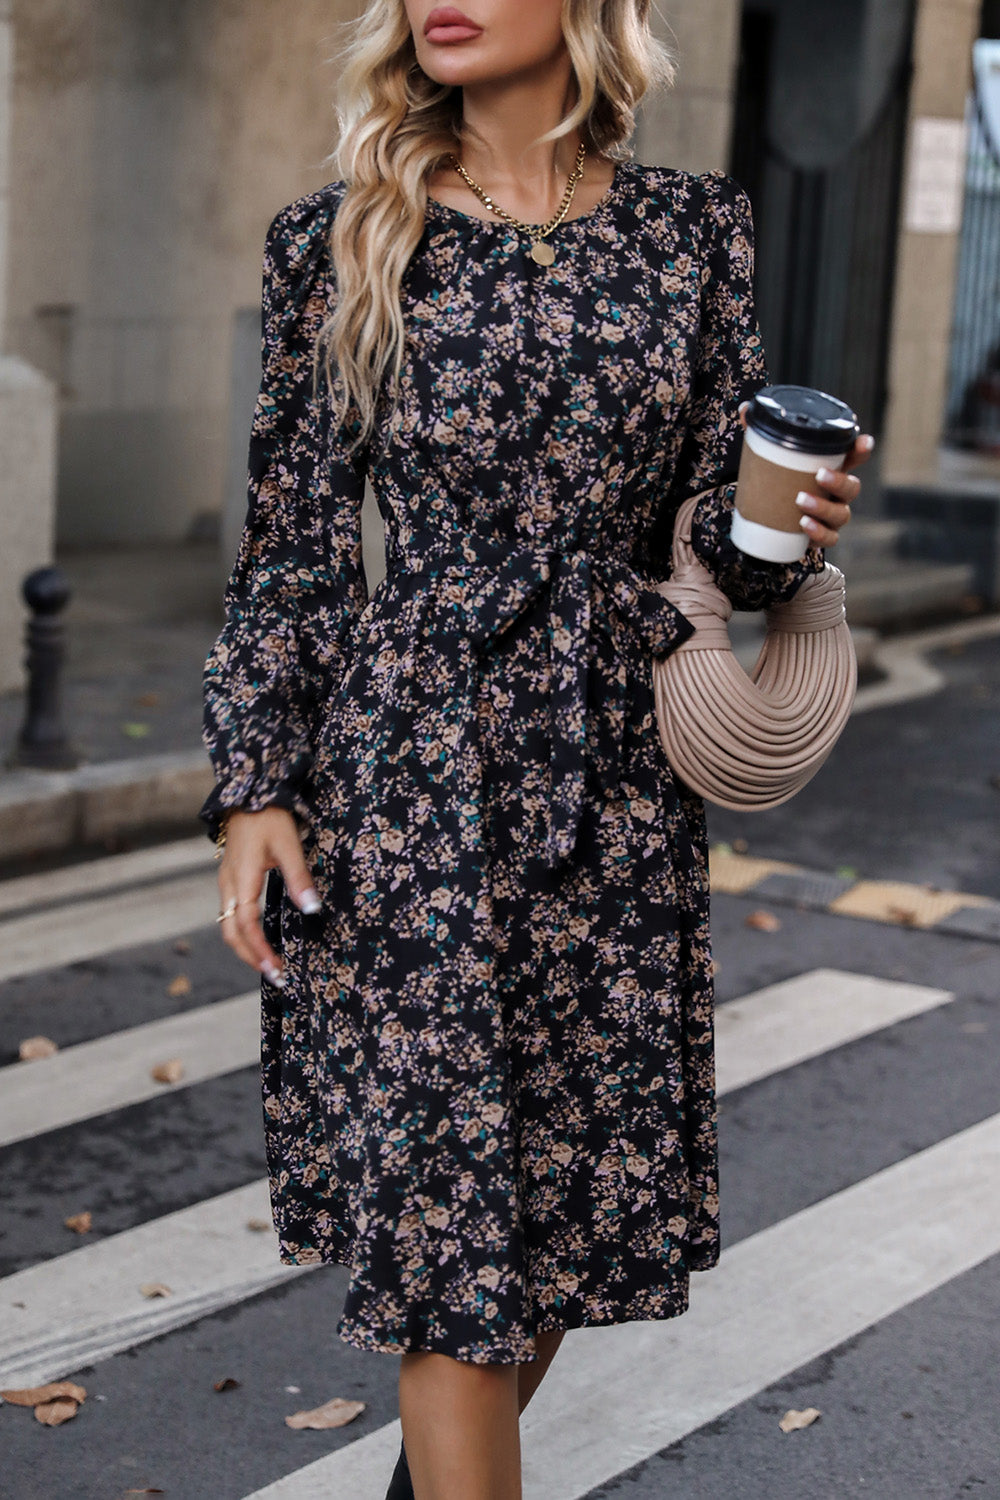 Floral Printed Long Sleeve Dress Pattern Round Neck Flounce Sleeves Women's Fashion